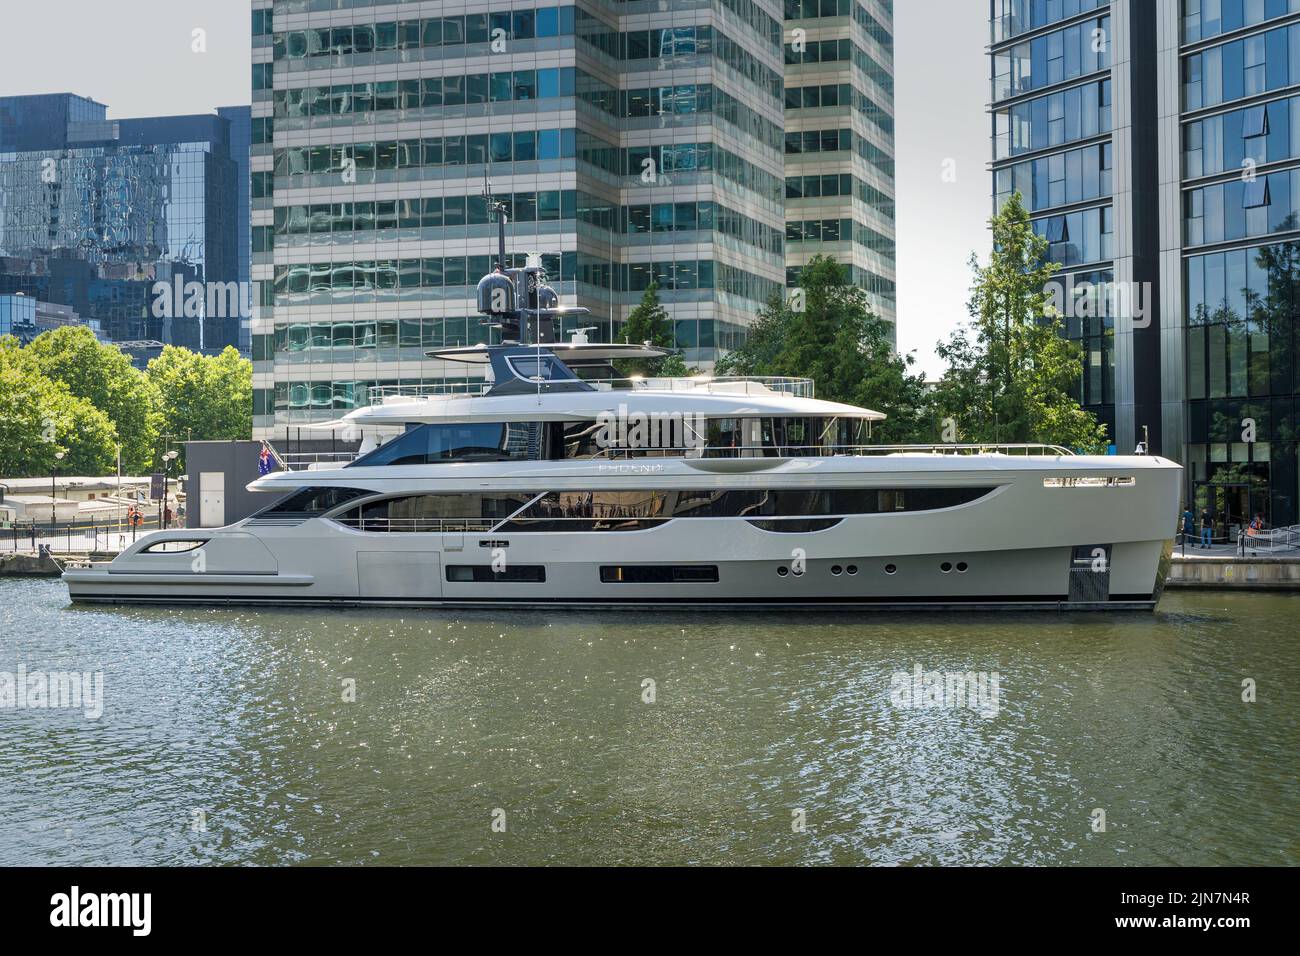 Phoenix Benetti super yacht moored up in the docklands of Canary Wharf. London - 9th August 2022 Stock Photo